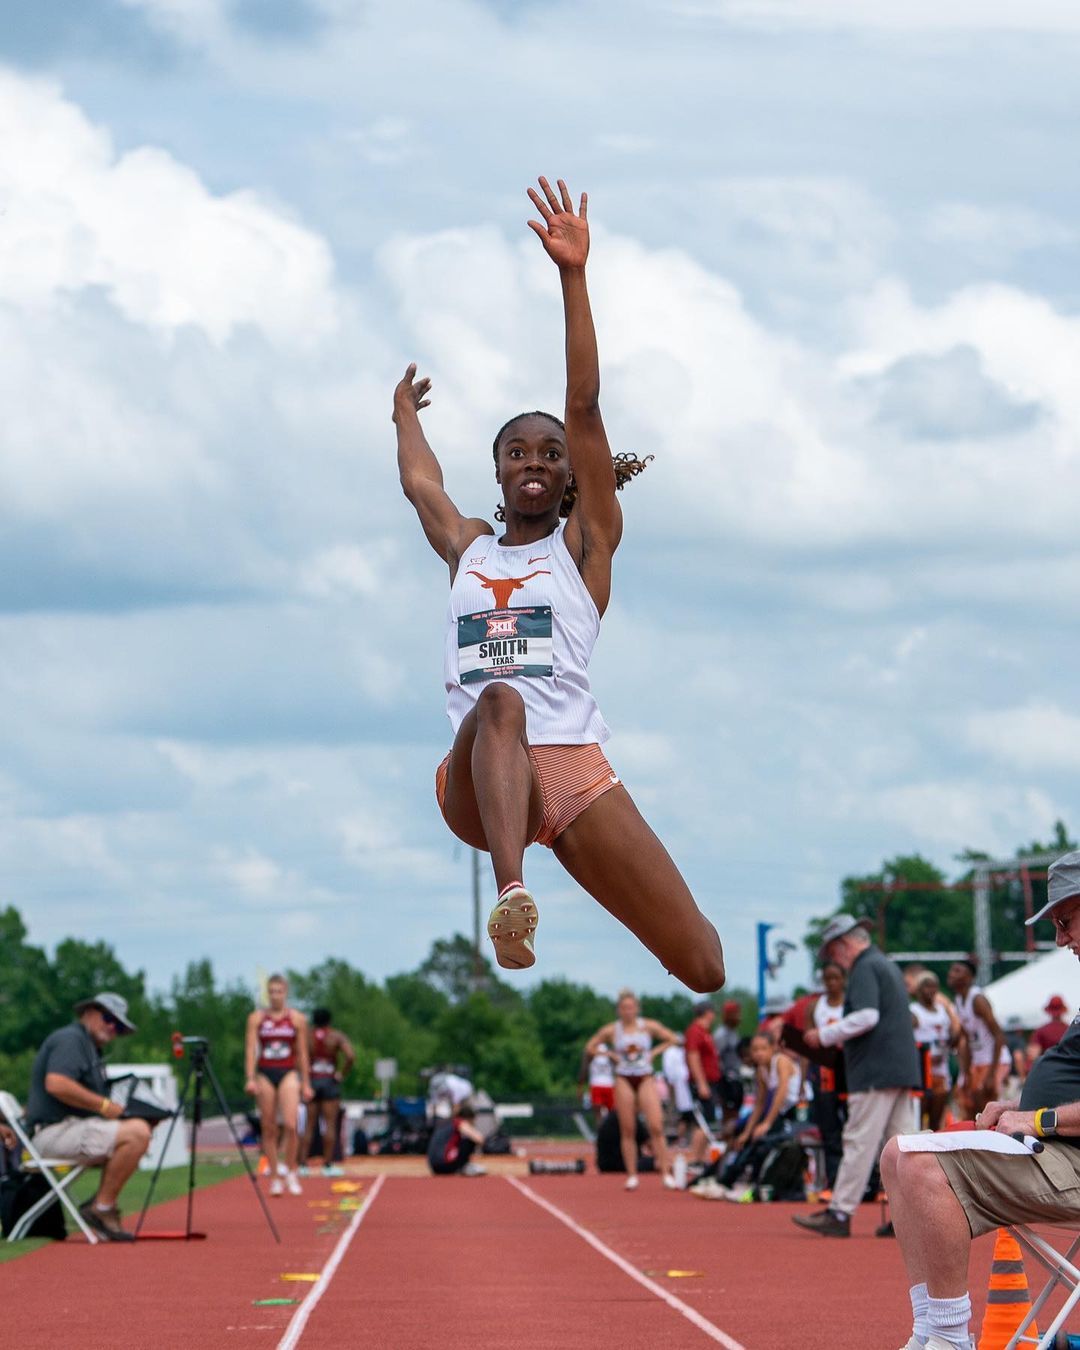 Ackelia Smith Reigns Supreme with Record-Breaking Leap at Big 12 Conference